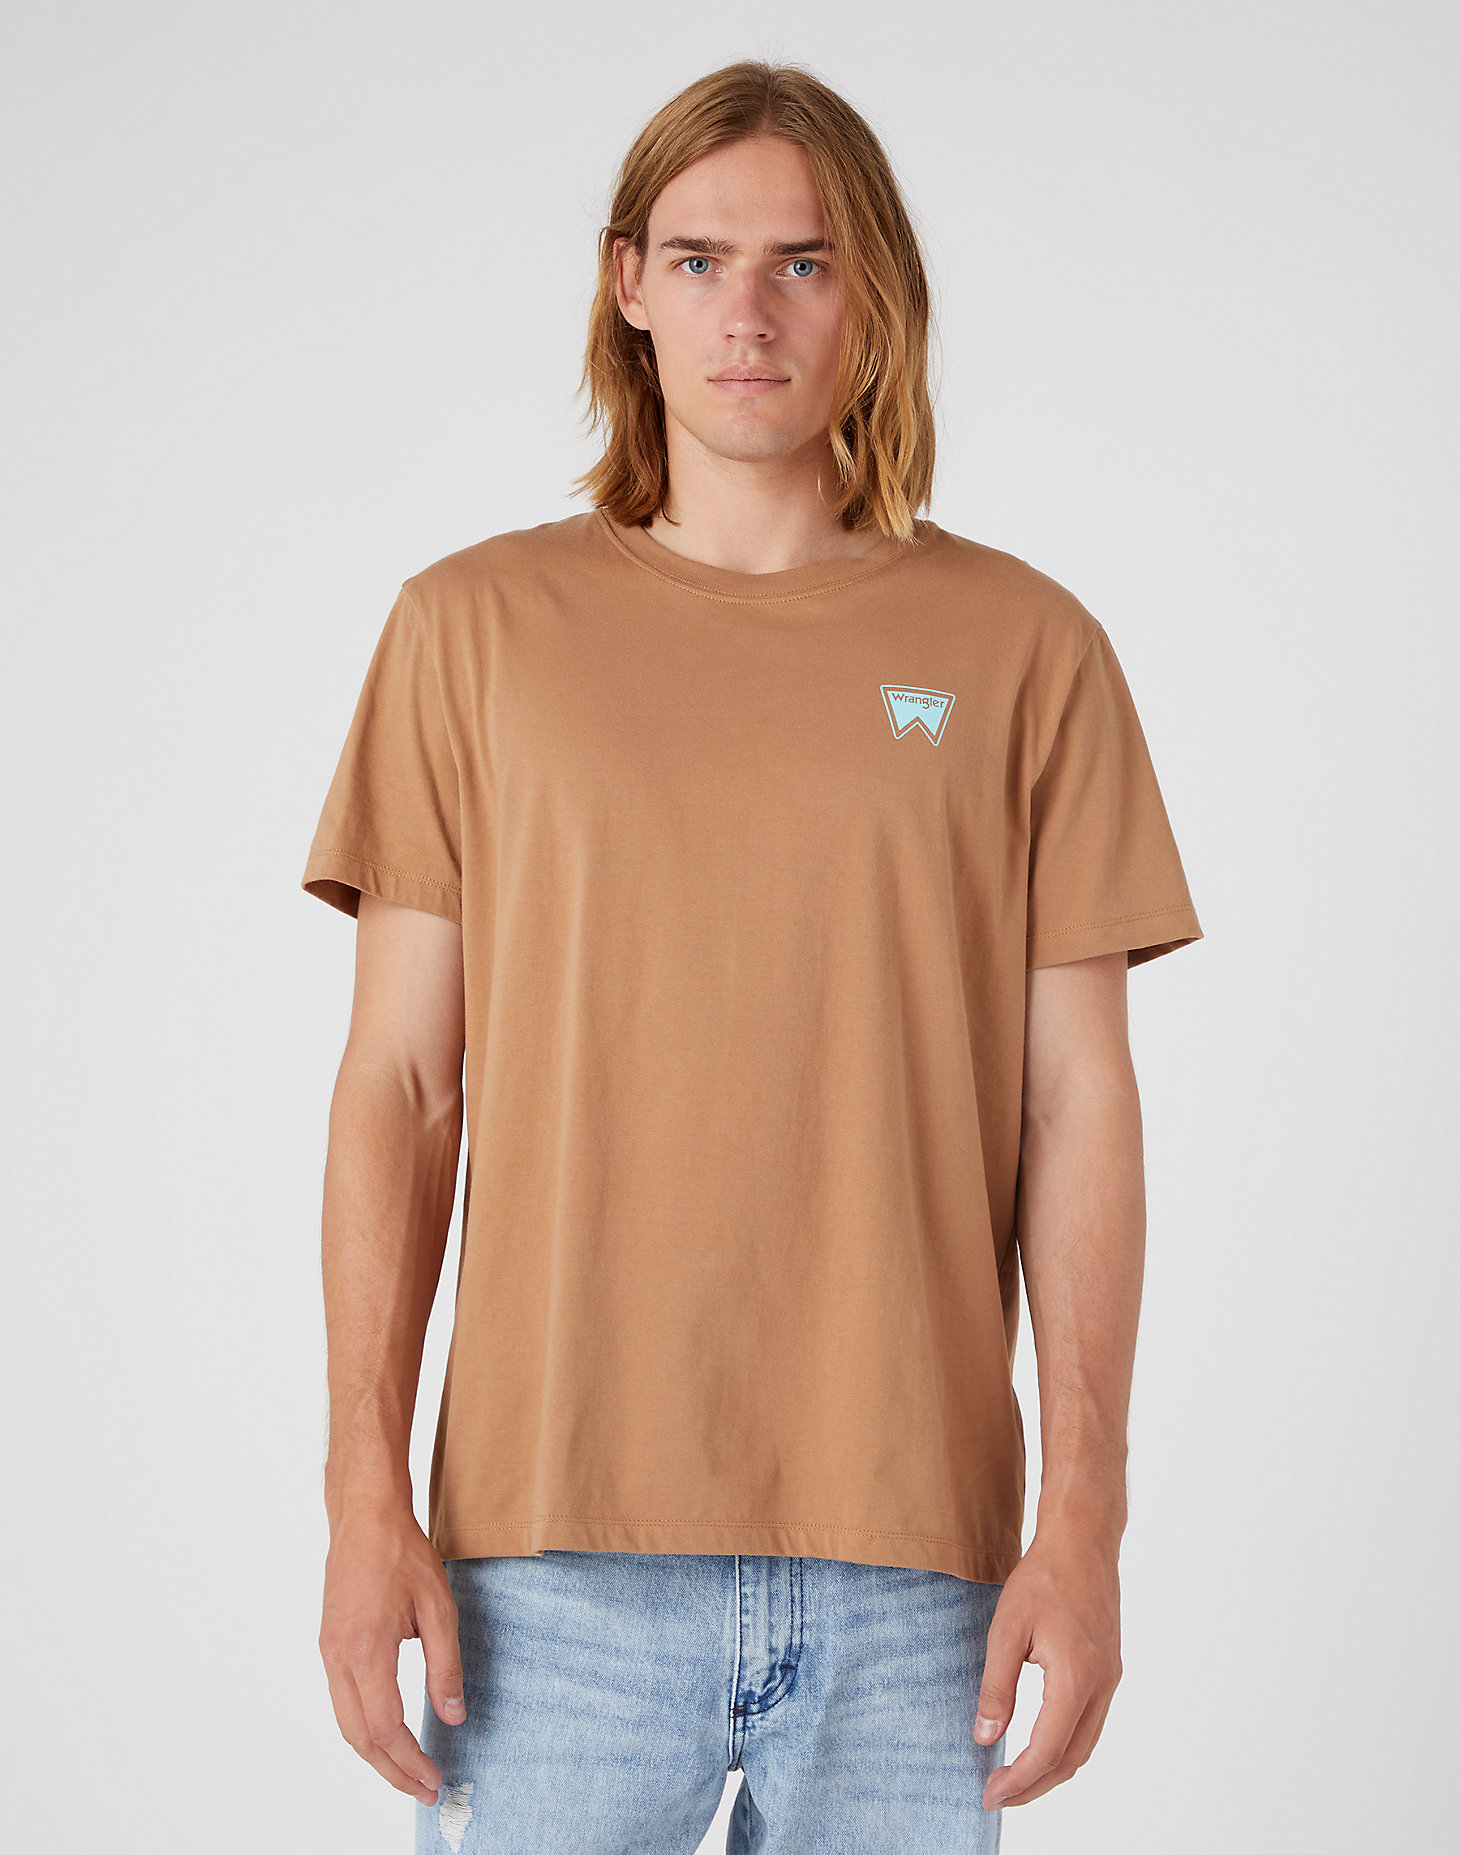 Graphic Tee in Burro Brown alternative view 3